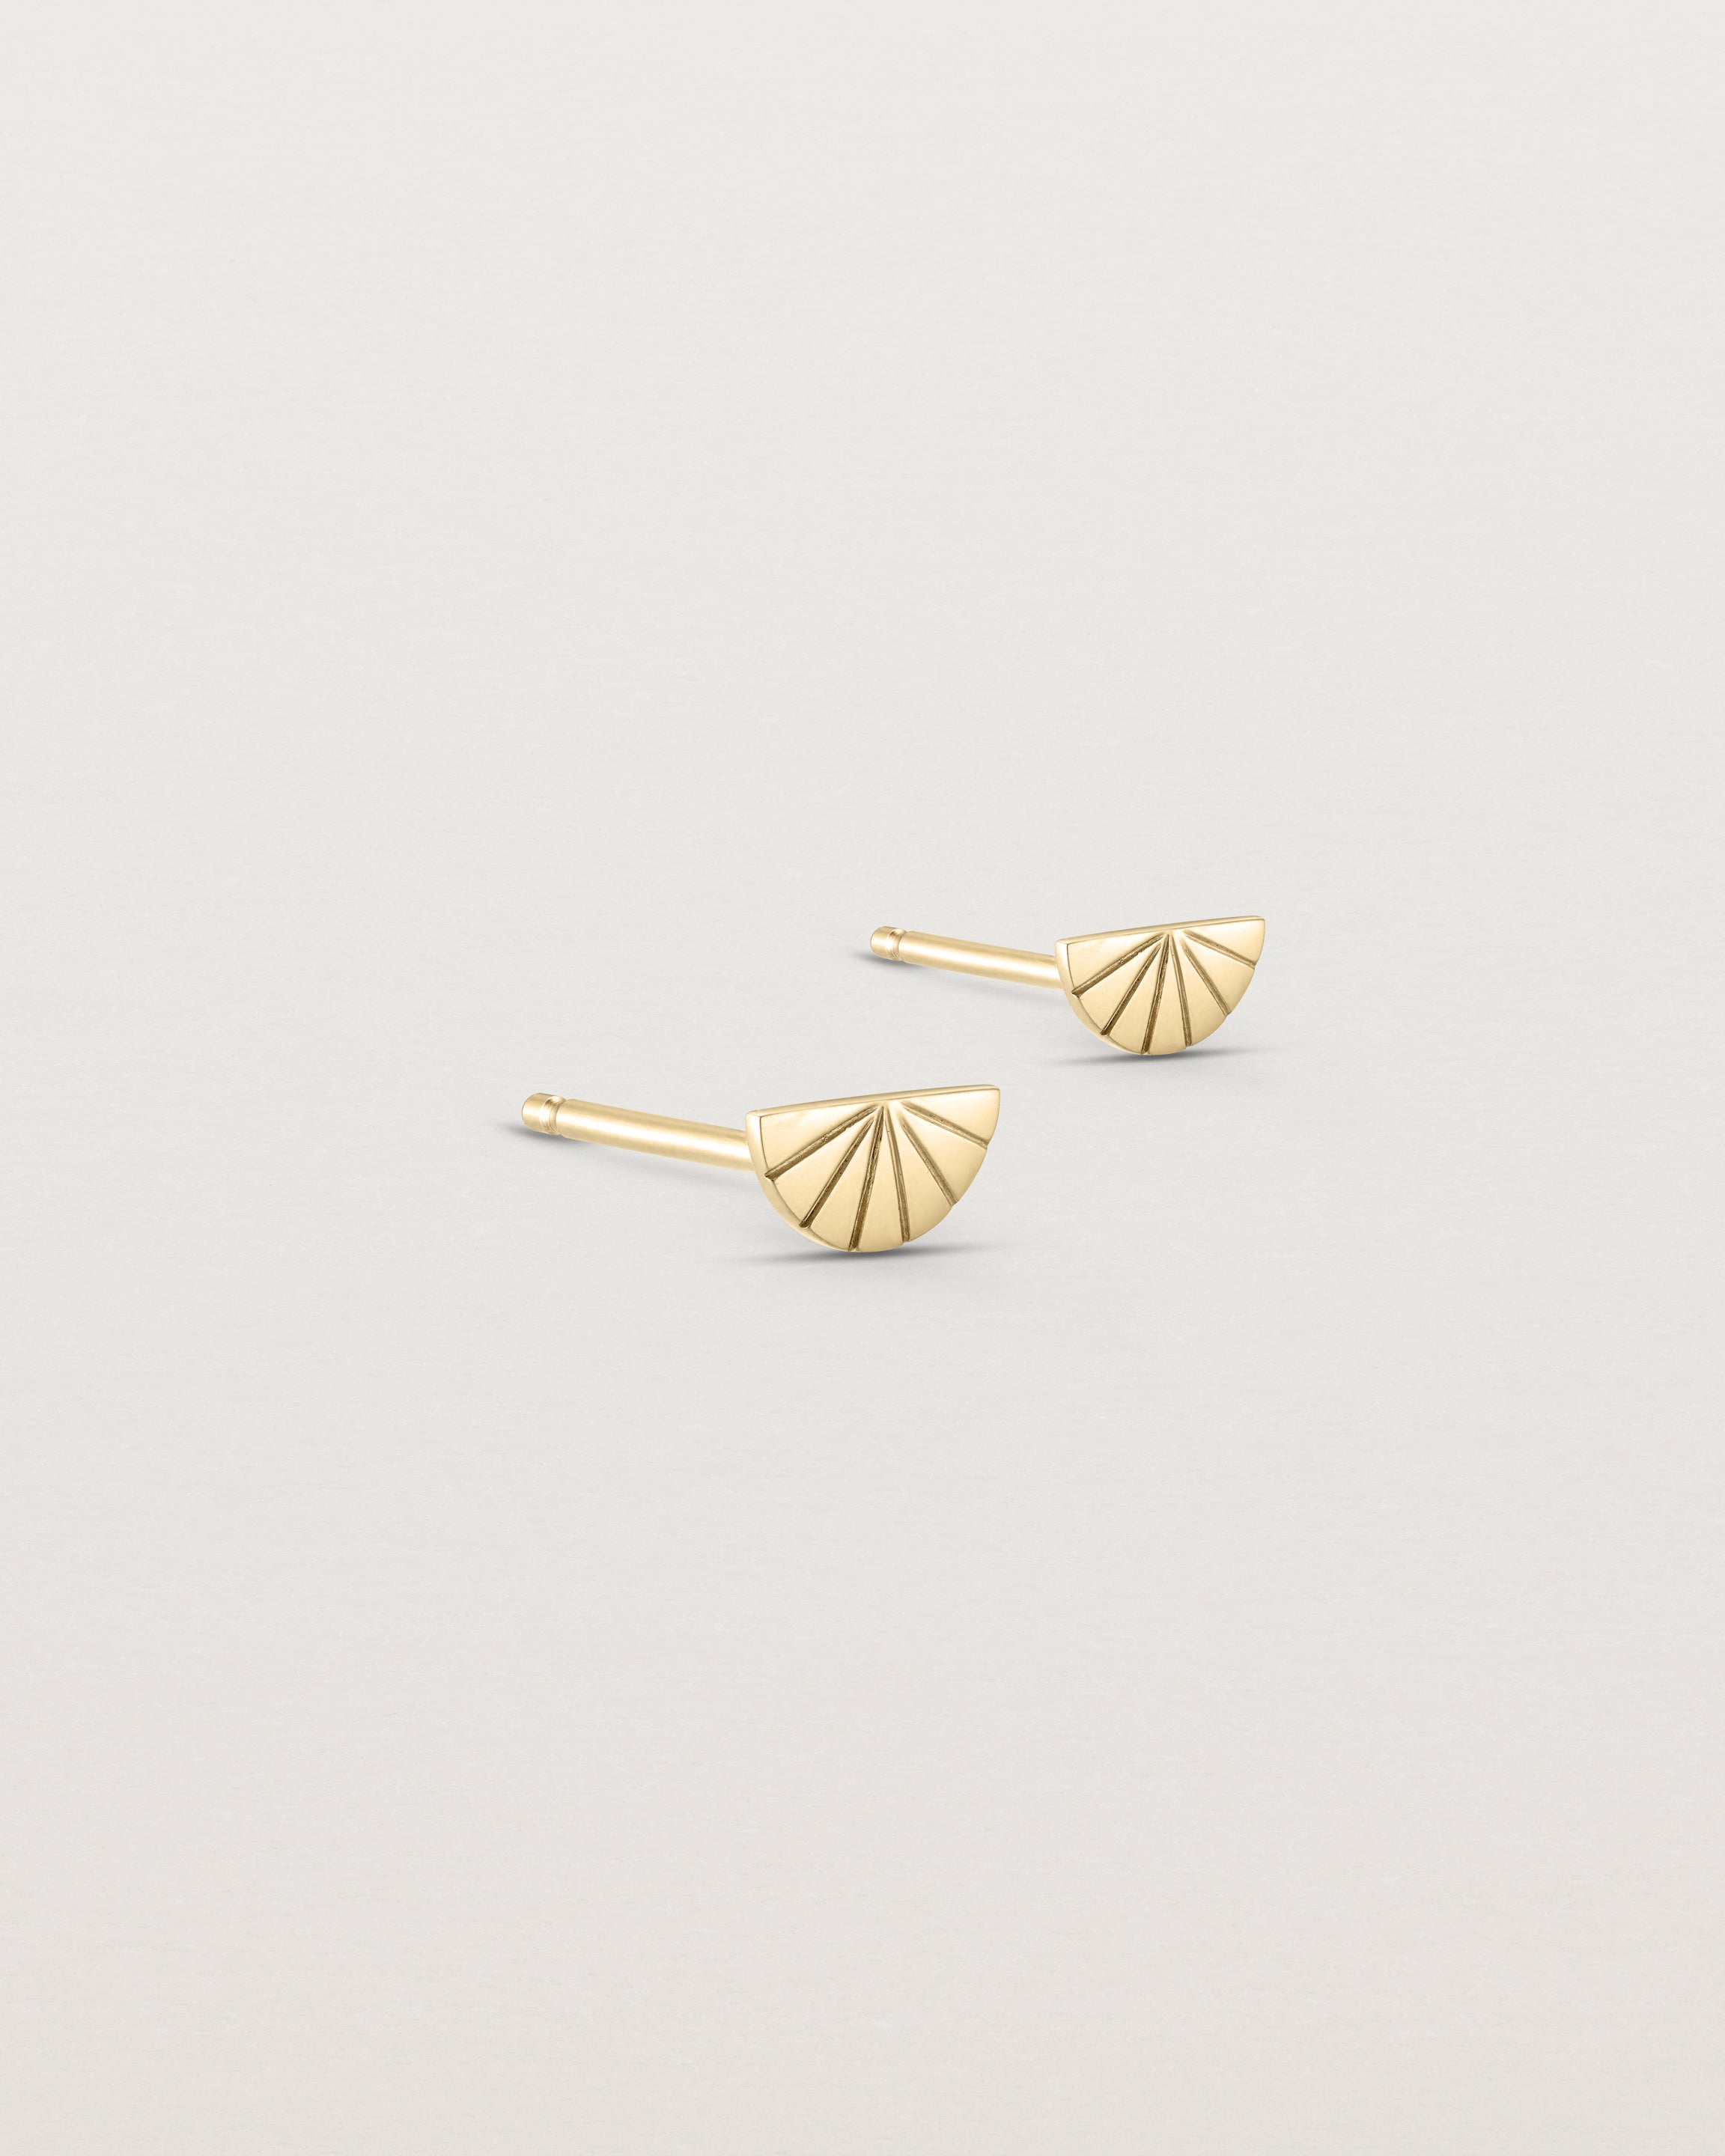 Angled view of the Jia Studs in yellow gold.